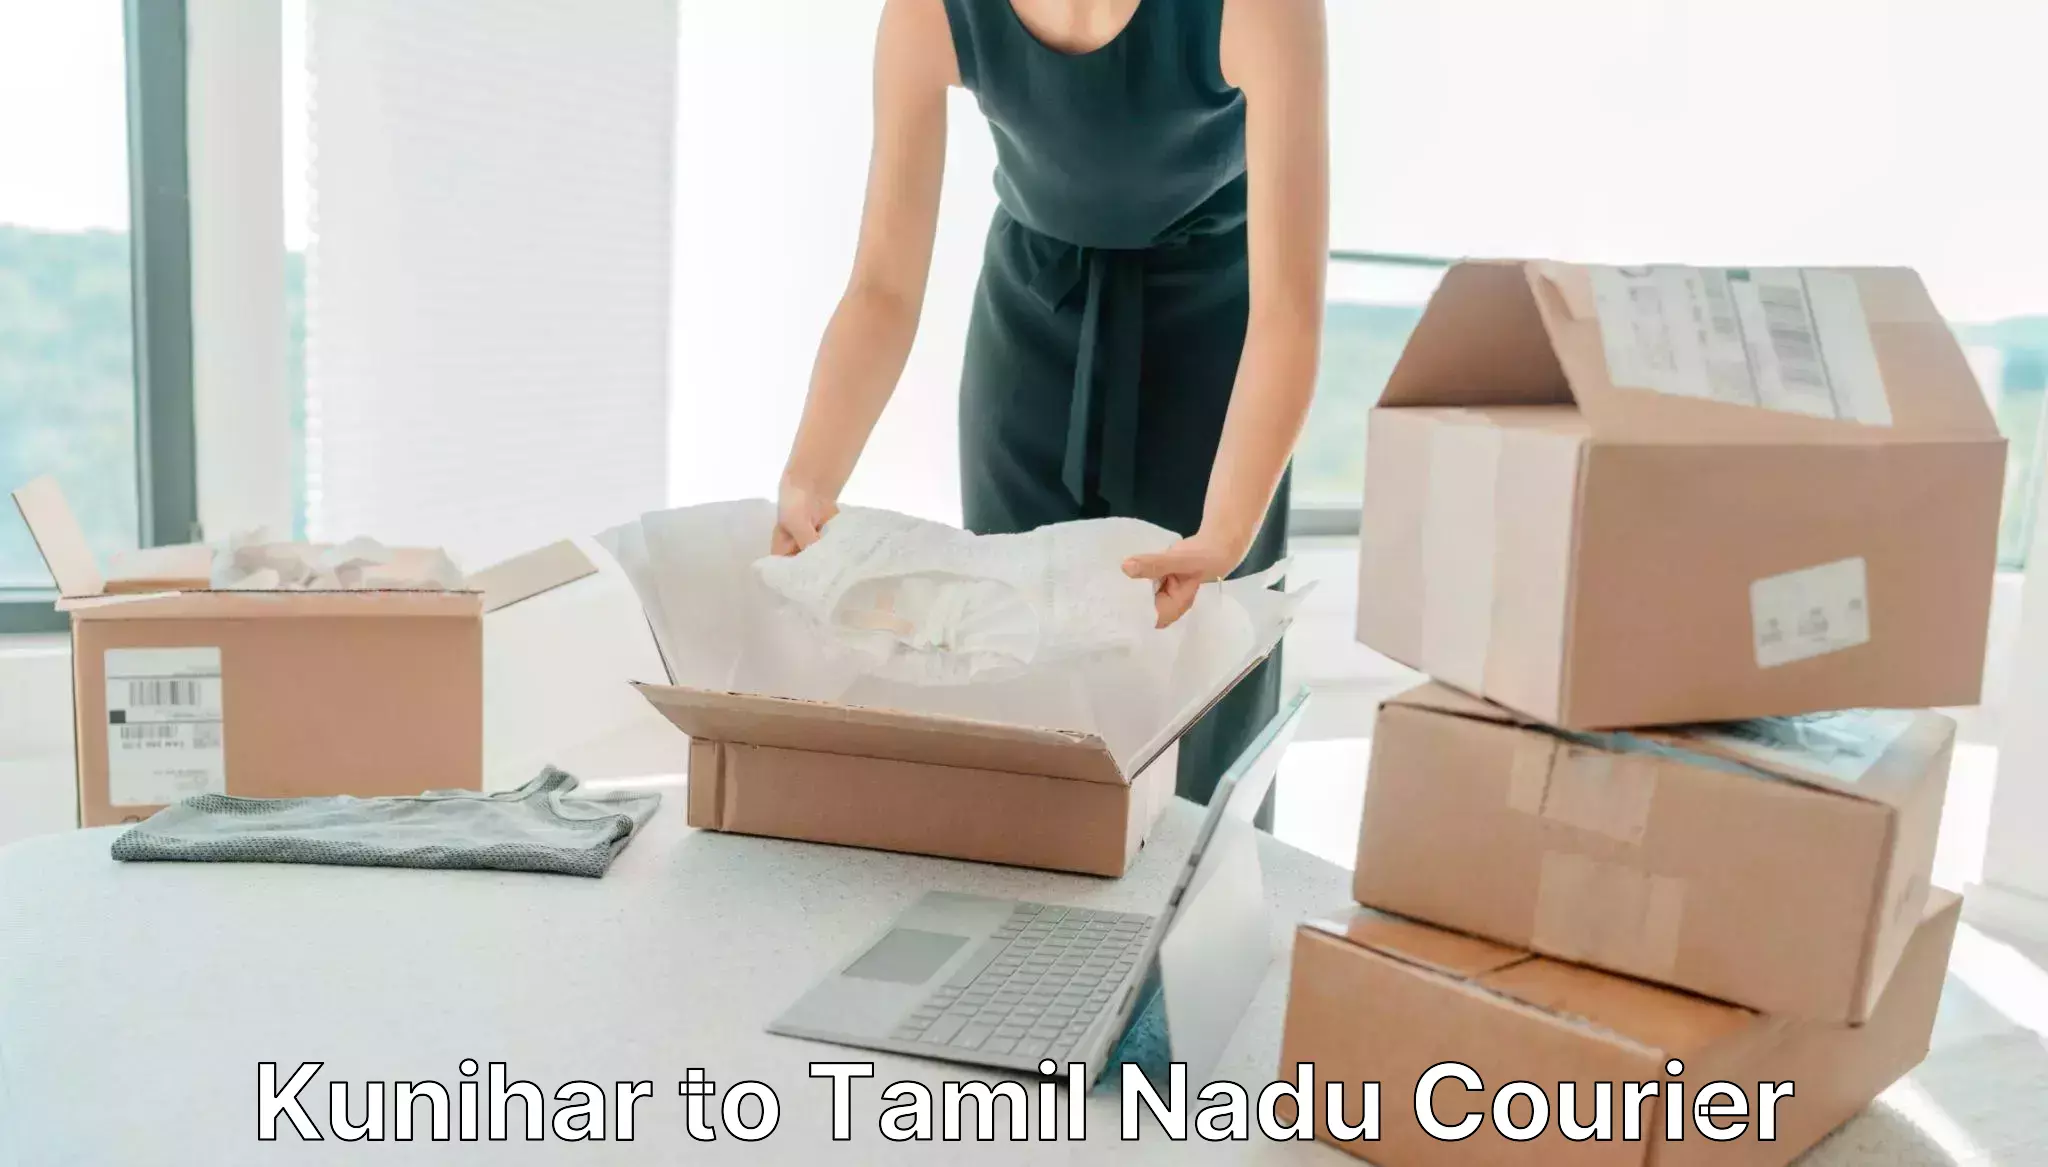 On-demand delivery Kunihar to Tamil Nadu